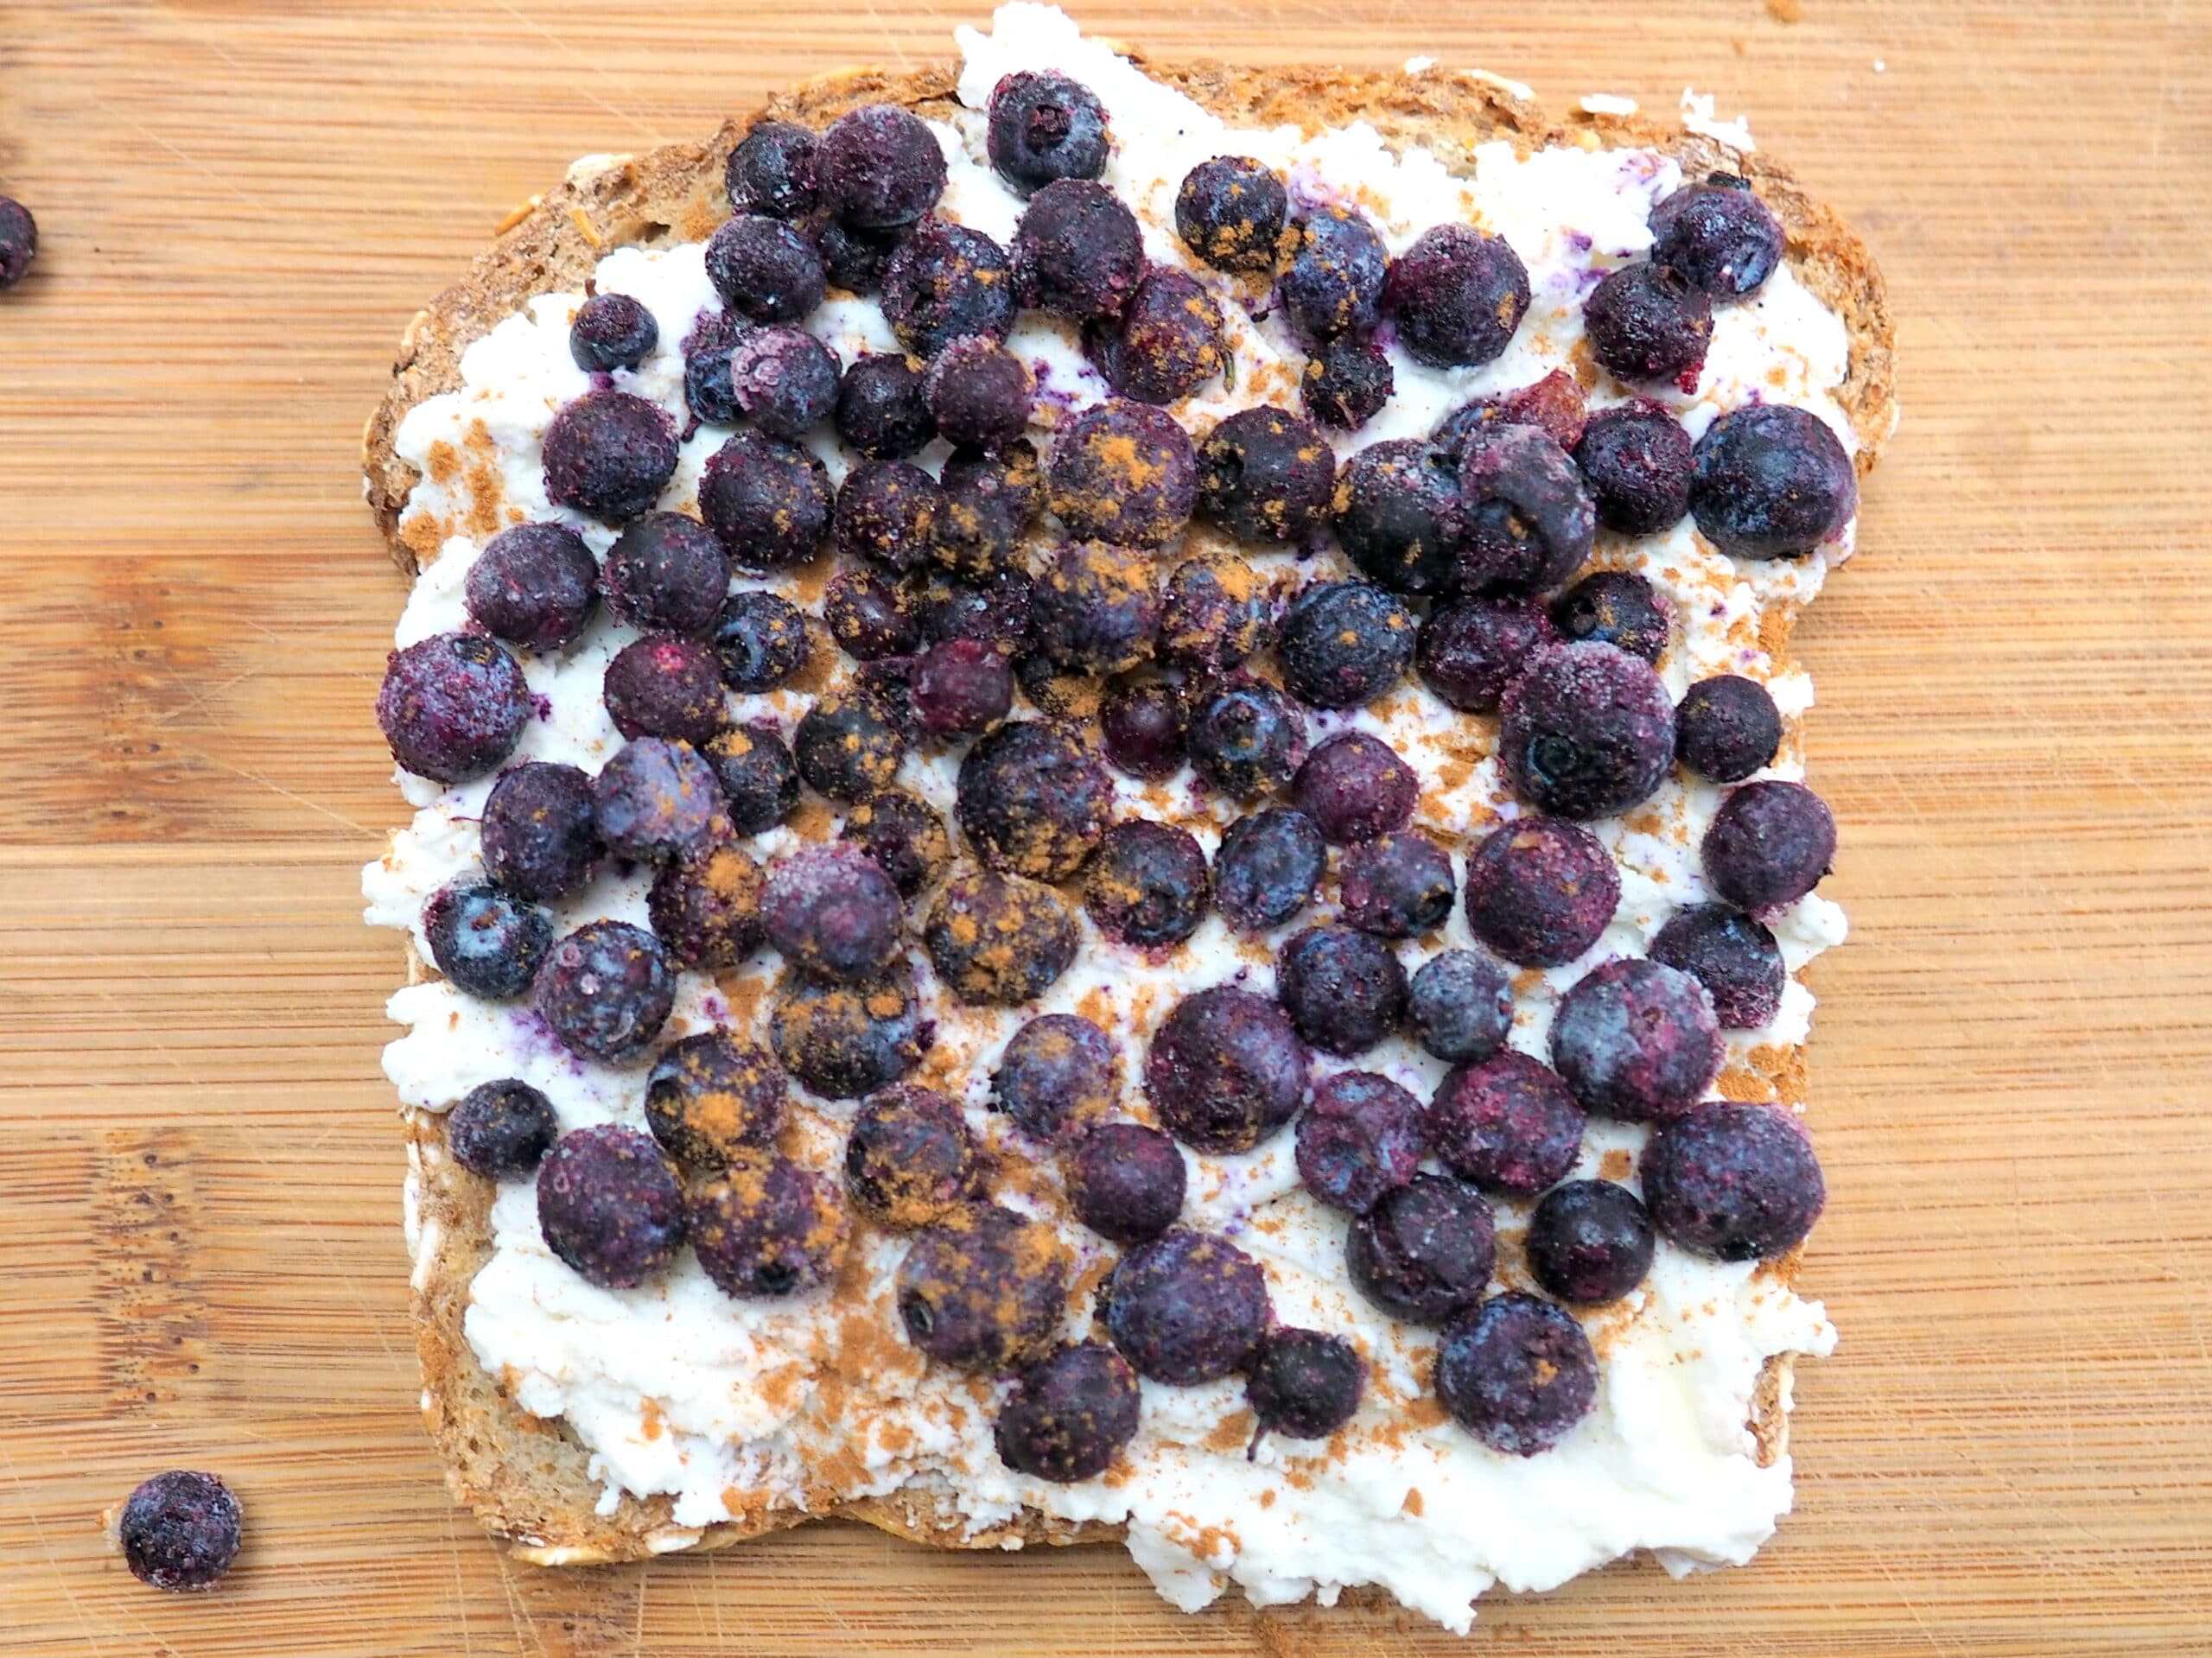 This wild blueberry and cream toast is a perfect addition to your breakfast or snack rotation. Made with antioxidant-rich frozen, wild blueberries, sprouted whole grain bread, and ricotta cheese or dairy-free cashew cream and lightly broiled in the oven....it is soo good!